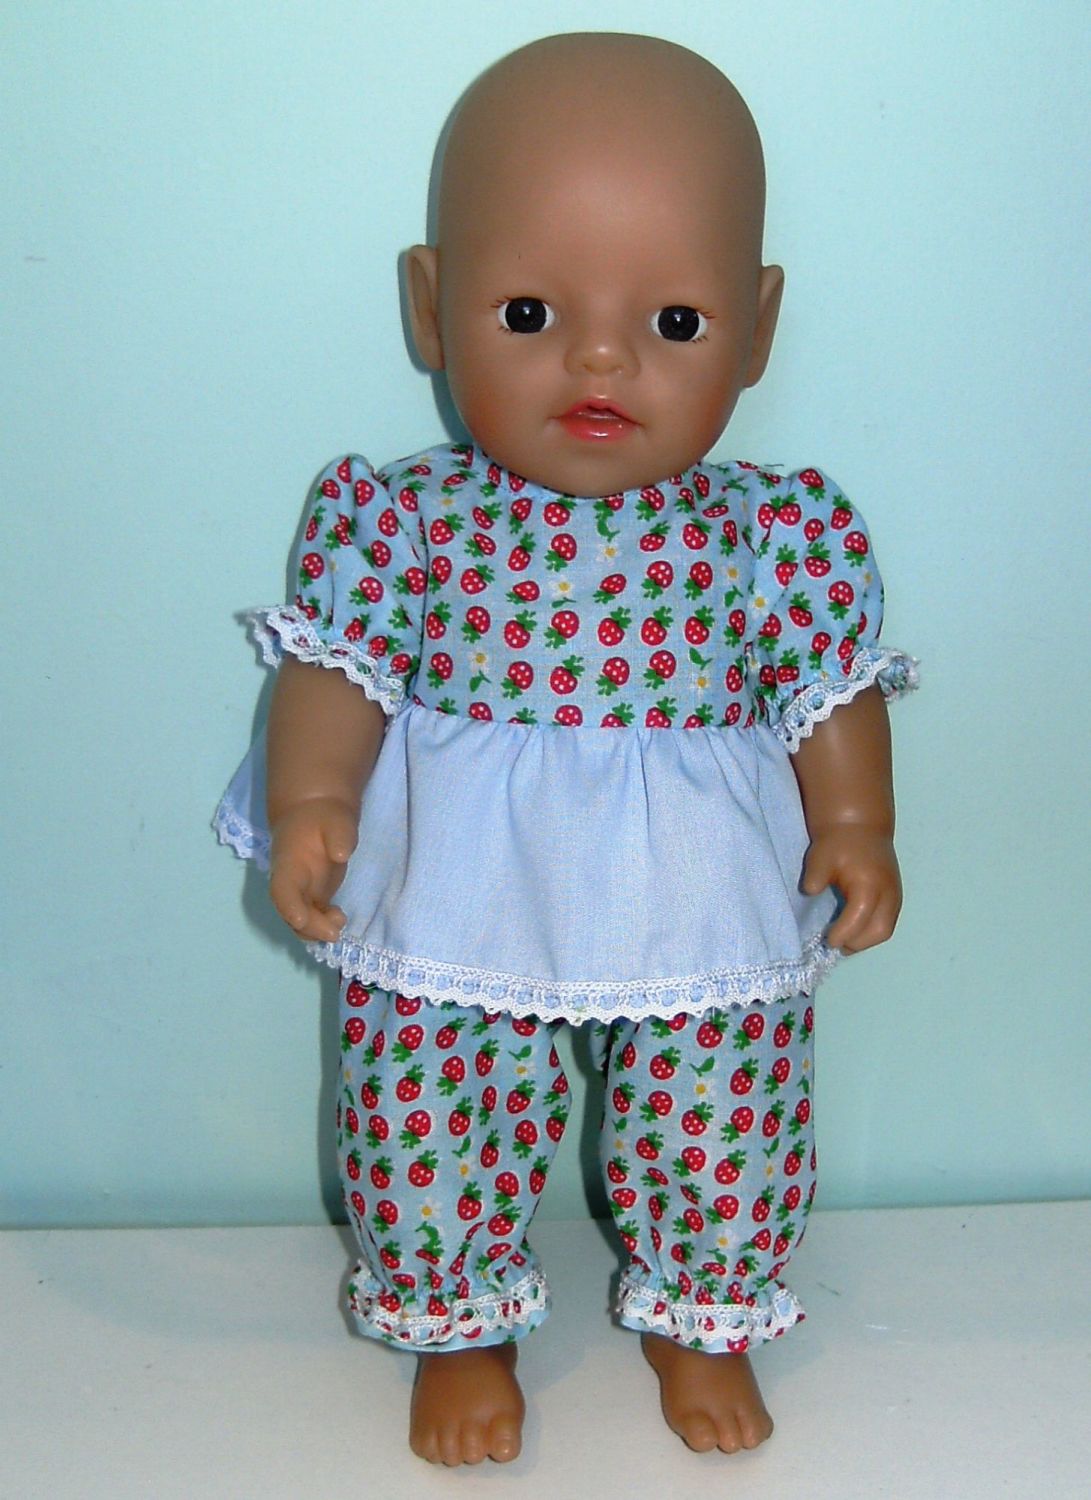 Doll's frilly pajamas to fit a 12 inch high baby doll